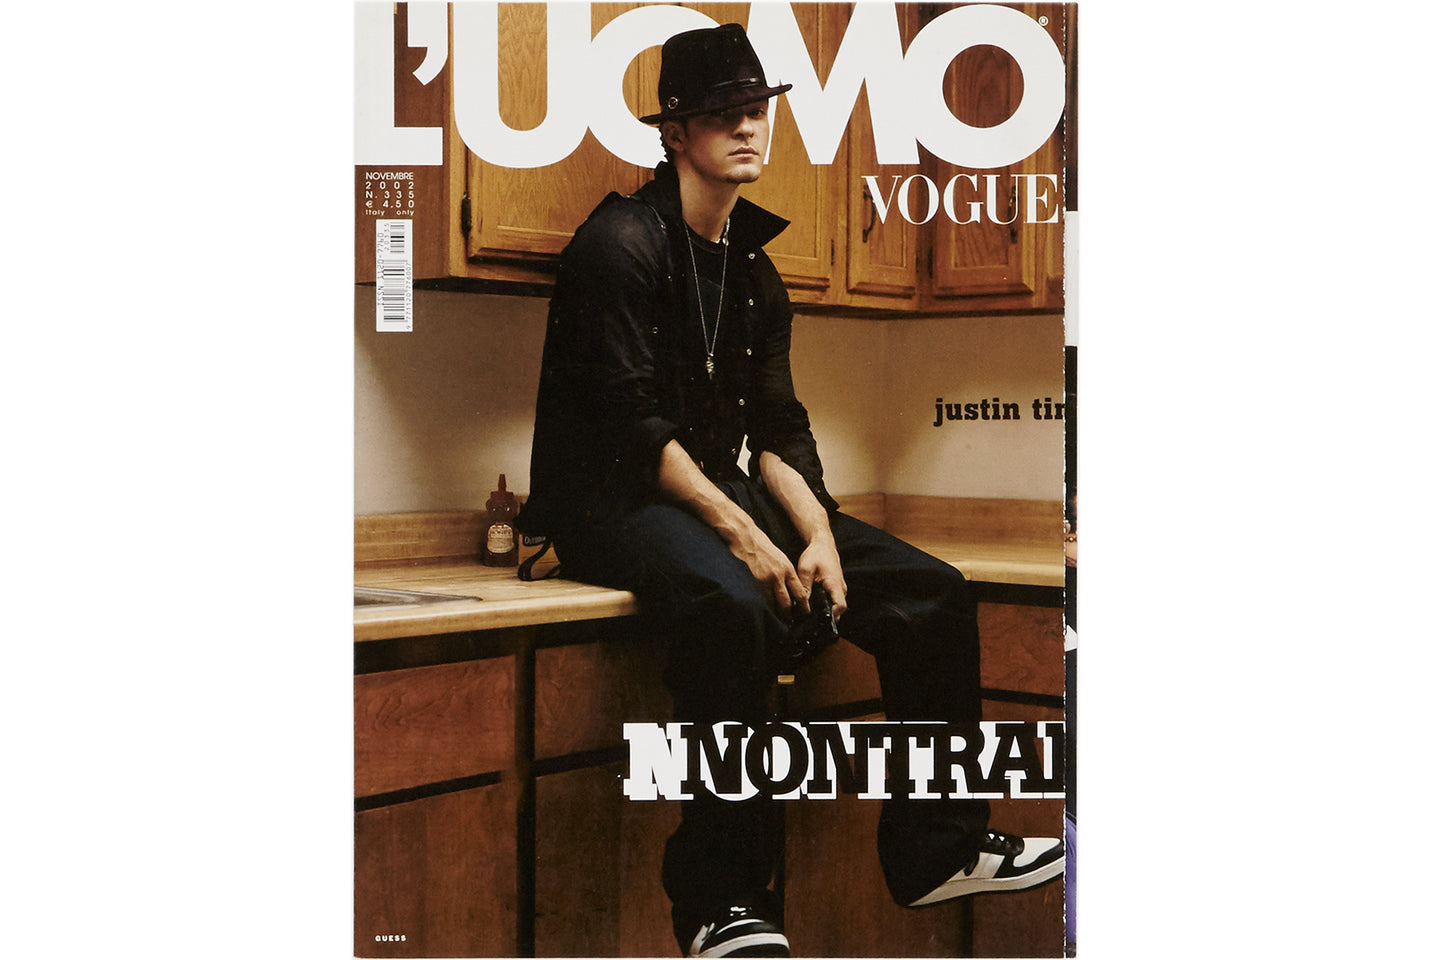 L’UOMO Vogue cover by Justin Timberlake